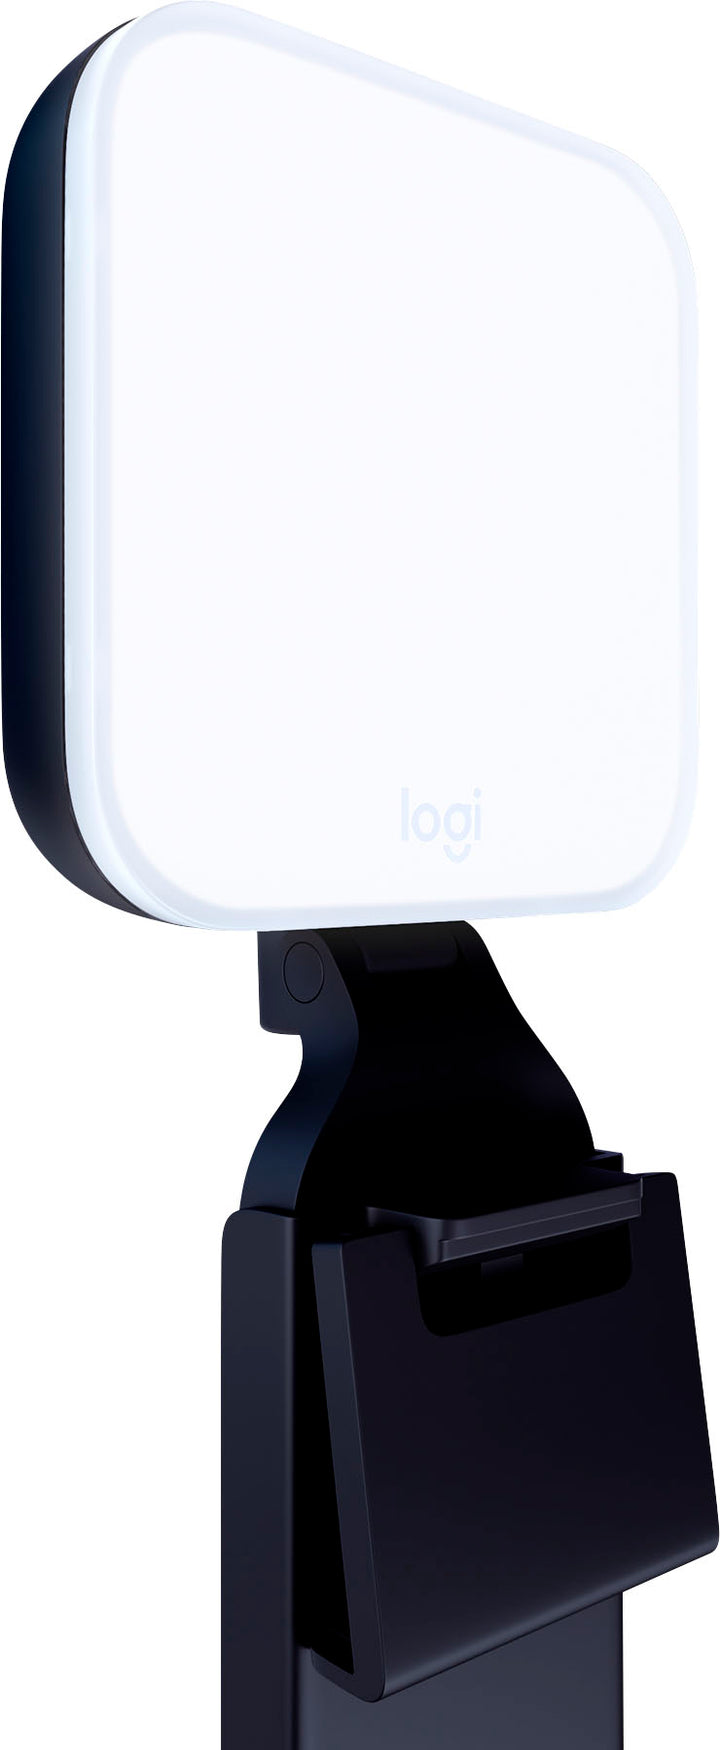 Logitech - Litra Glow Premium LED Streaming Light with TrueSoft, Adjustable mount and Desktop app control for PC/Mac - Graphite_0